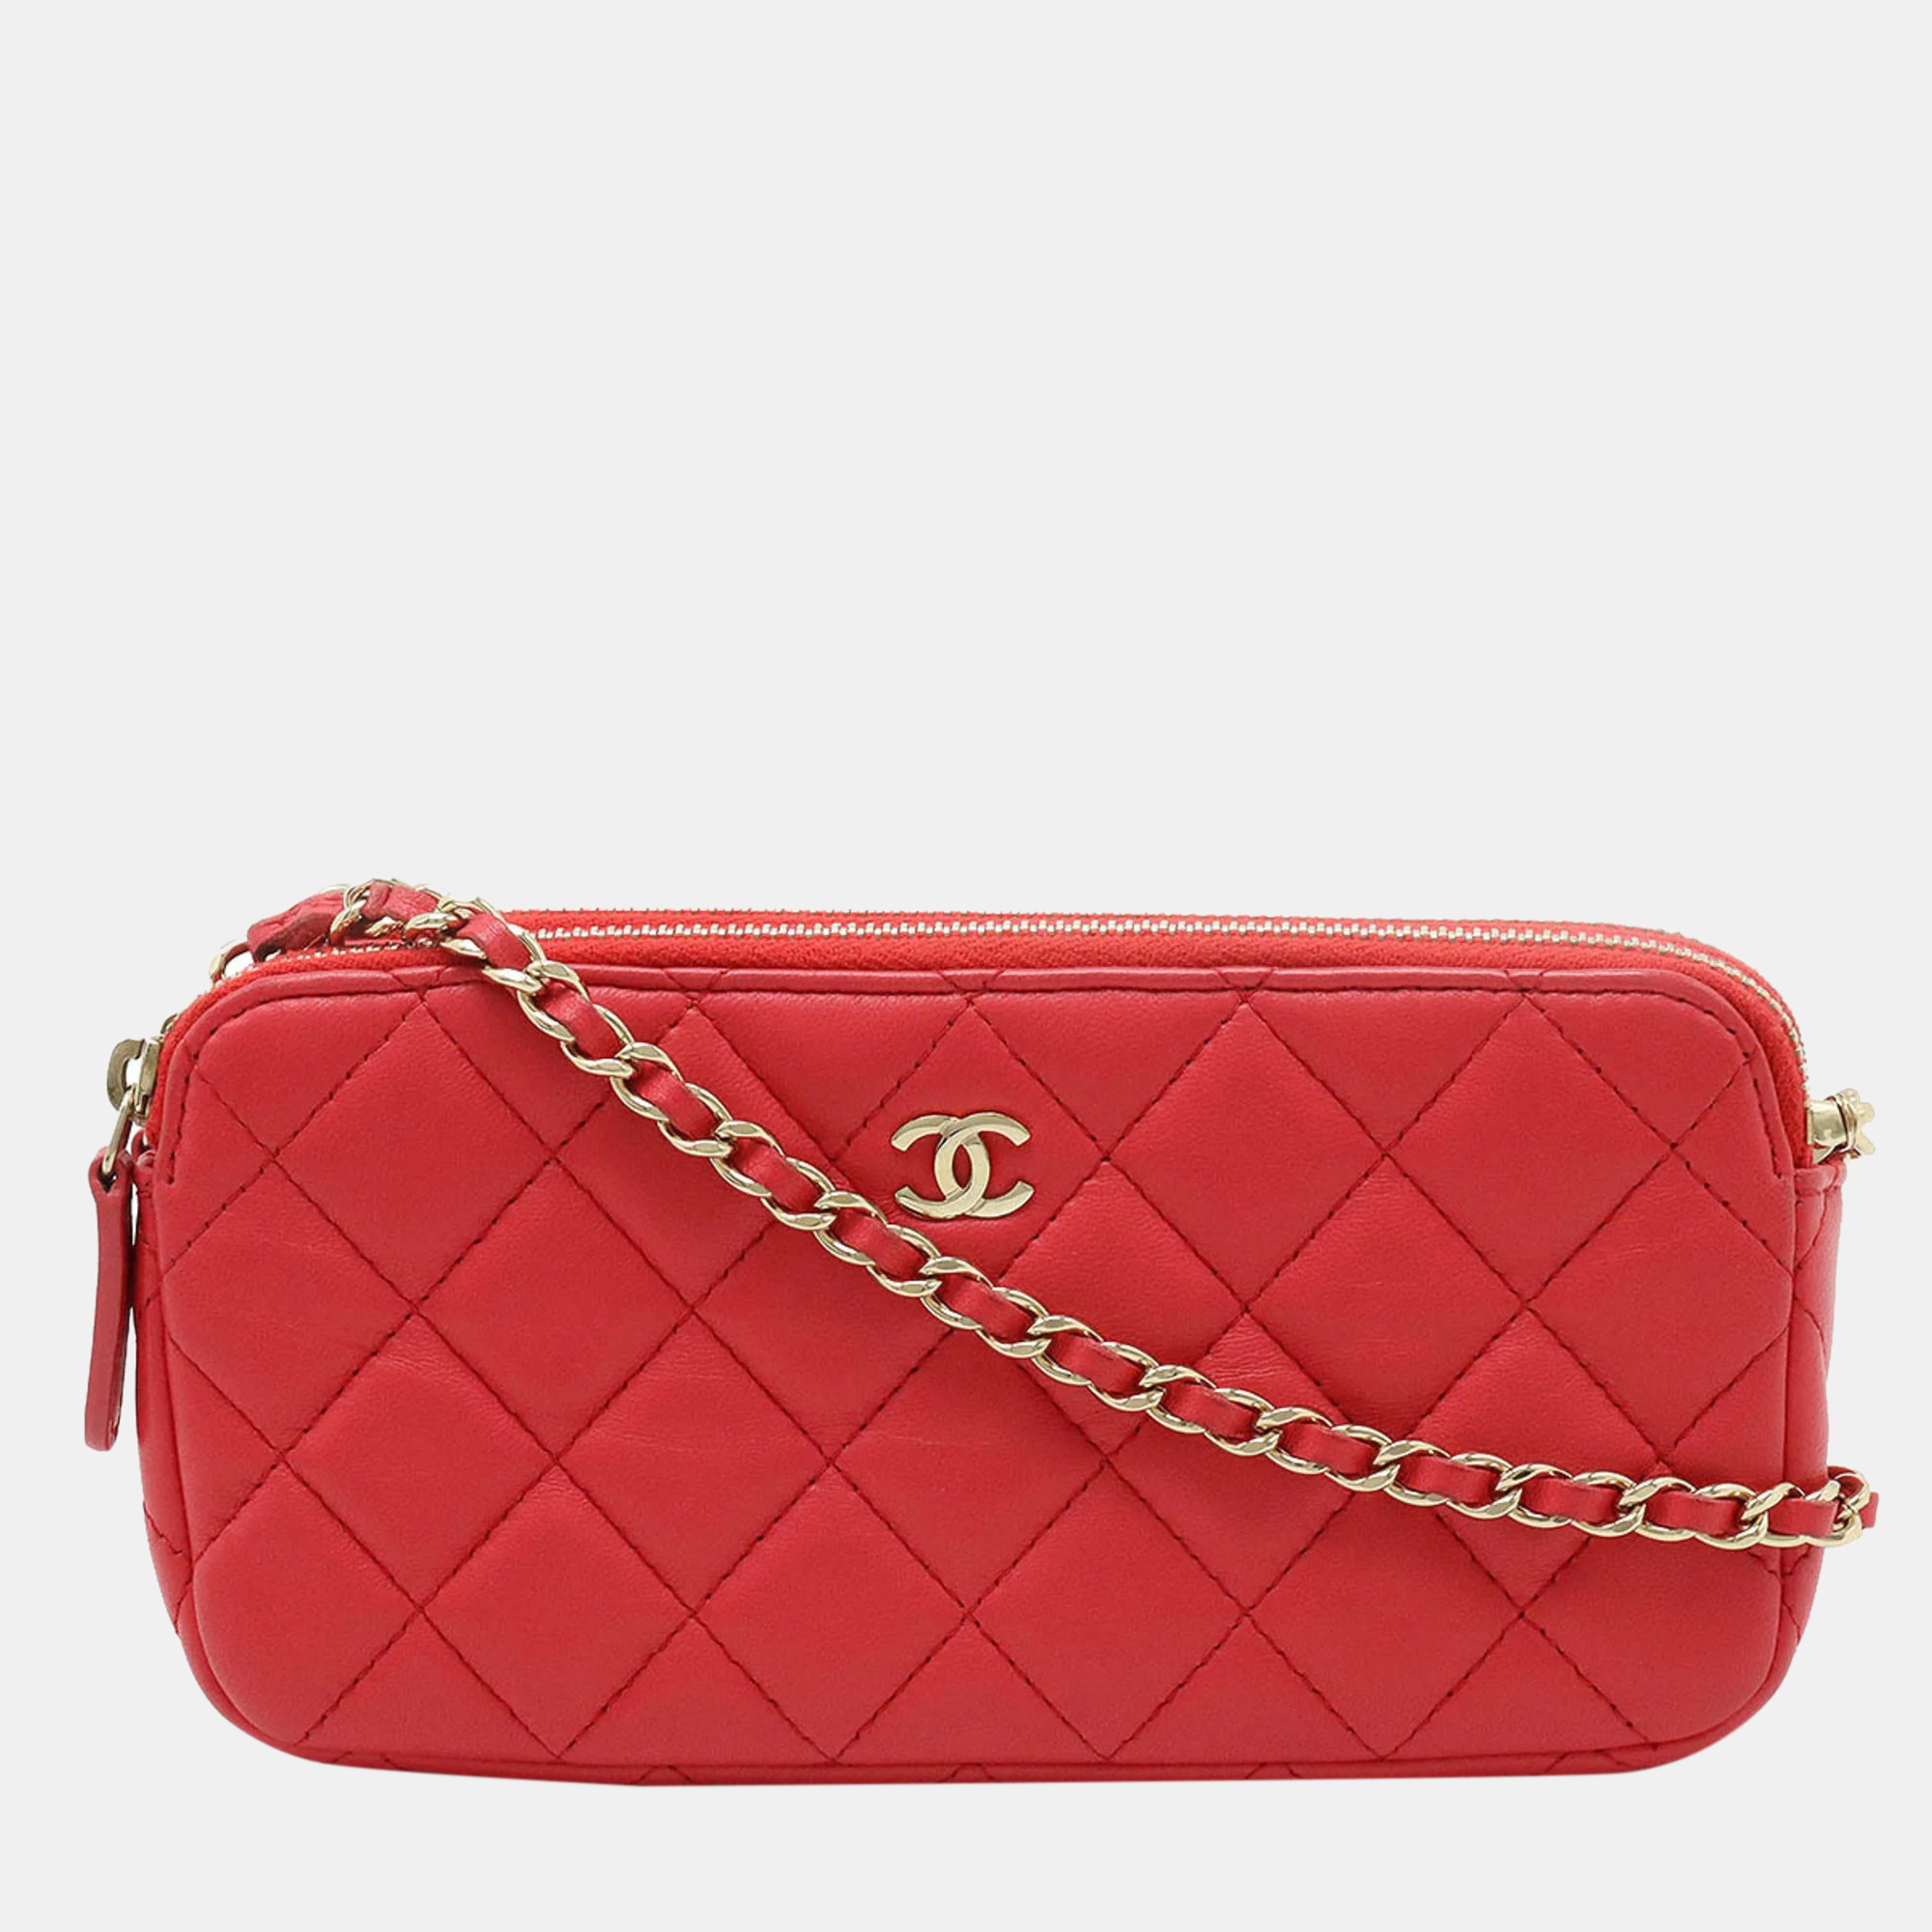 Chanel red lambskin quilted wallet on chain